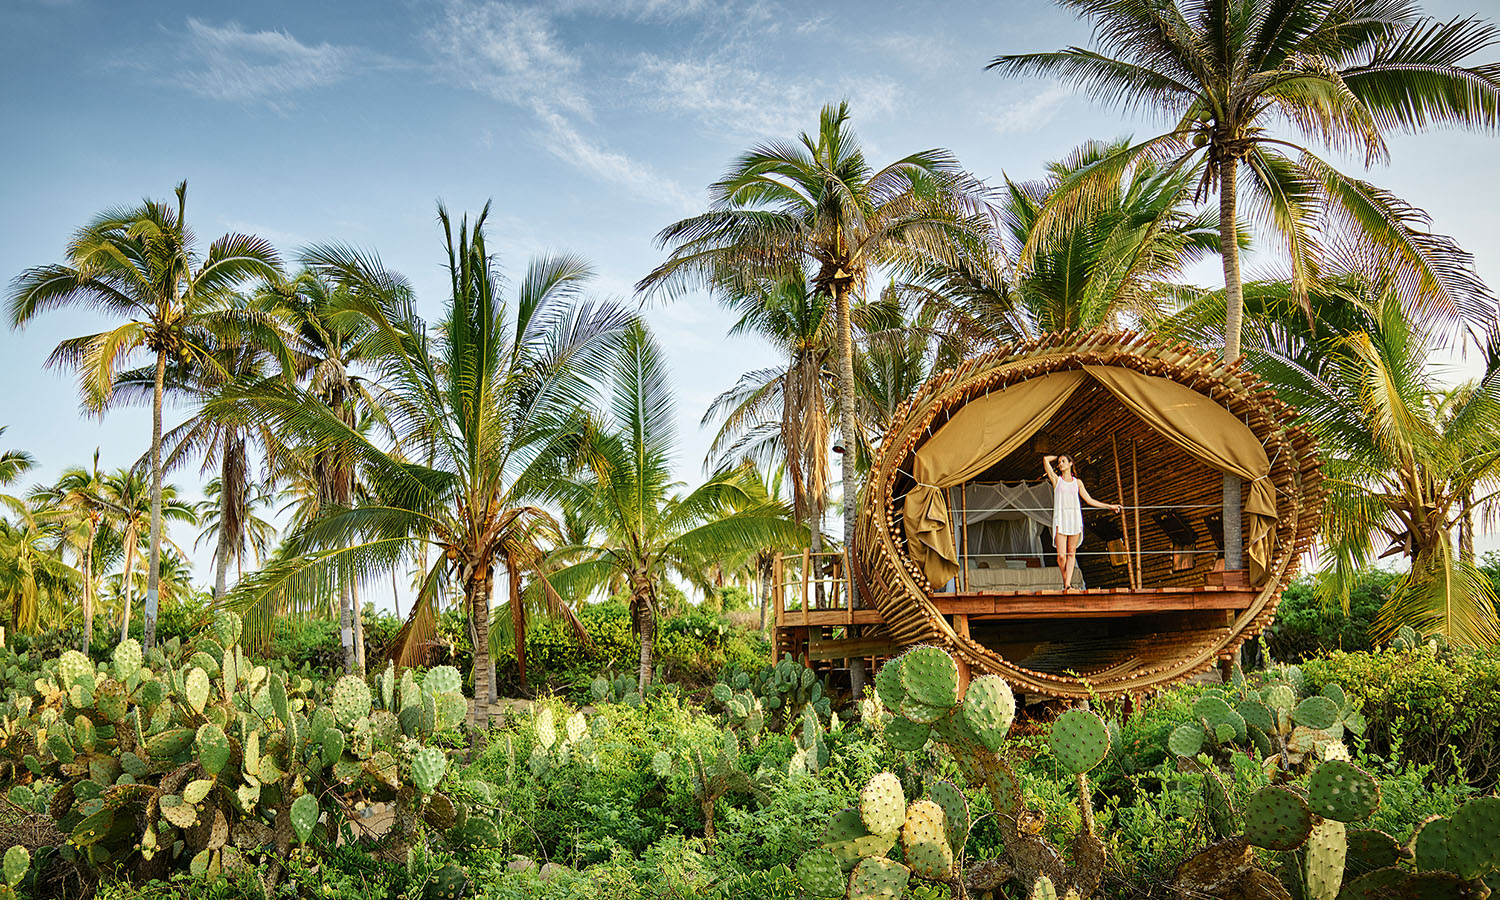 Beachfront eco-luxury doesn't get better than a treehouse in Mexico su...